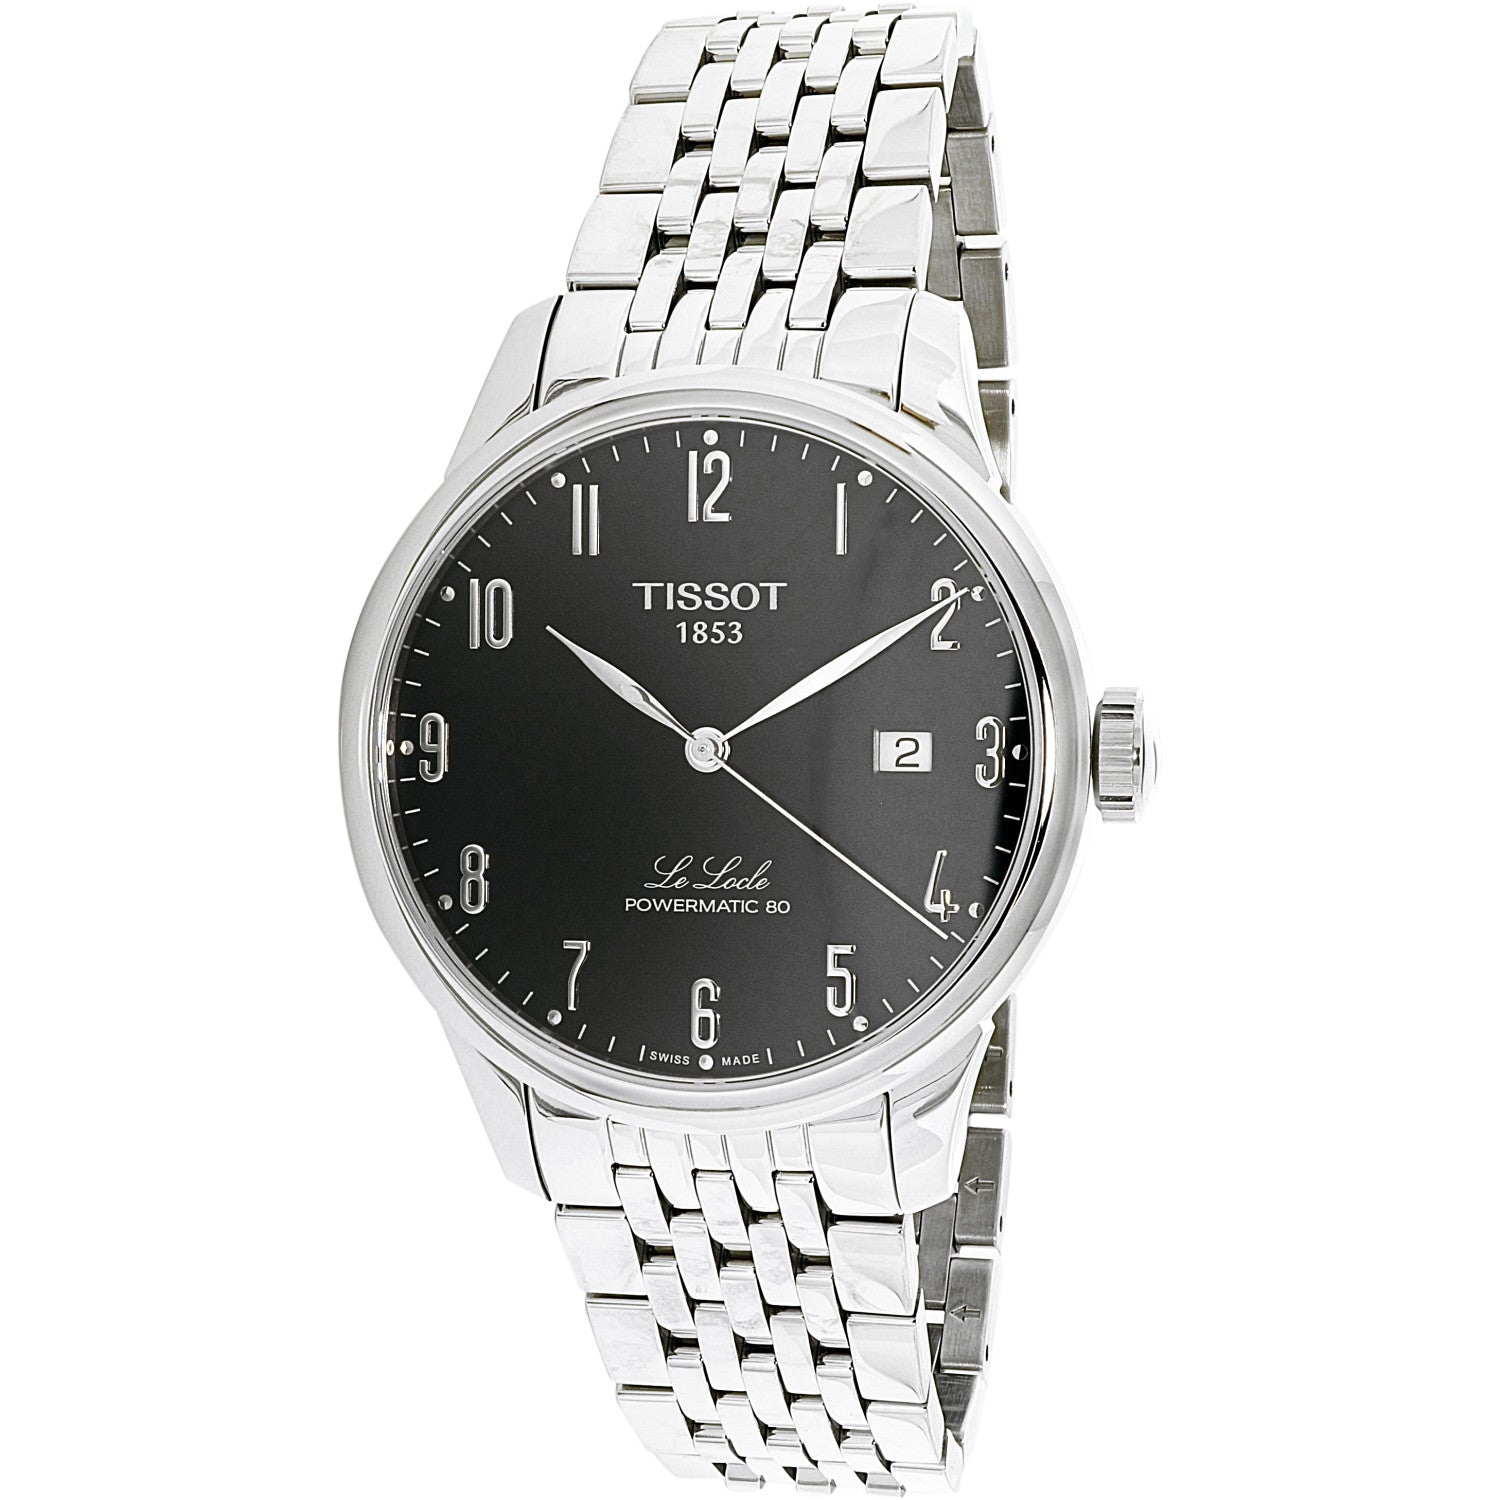 Tissot Le Locle Powermatic 80 Black Arabic Dial 40mm Stainless Steel Watch For Men - T006.407.11.052.00